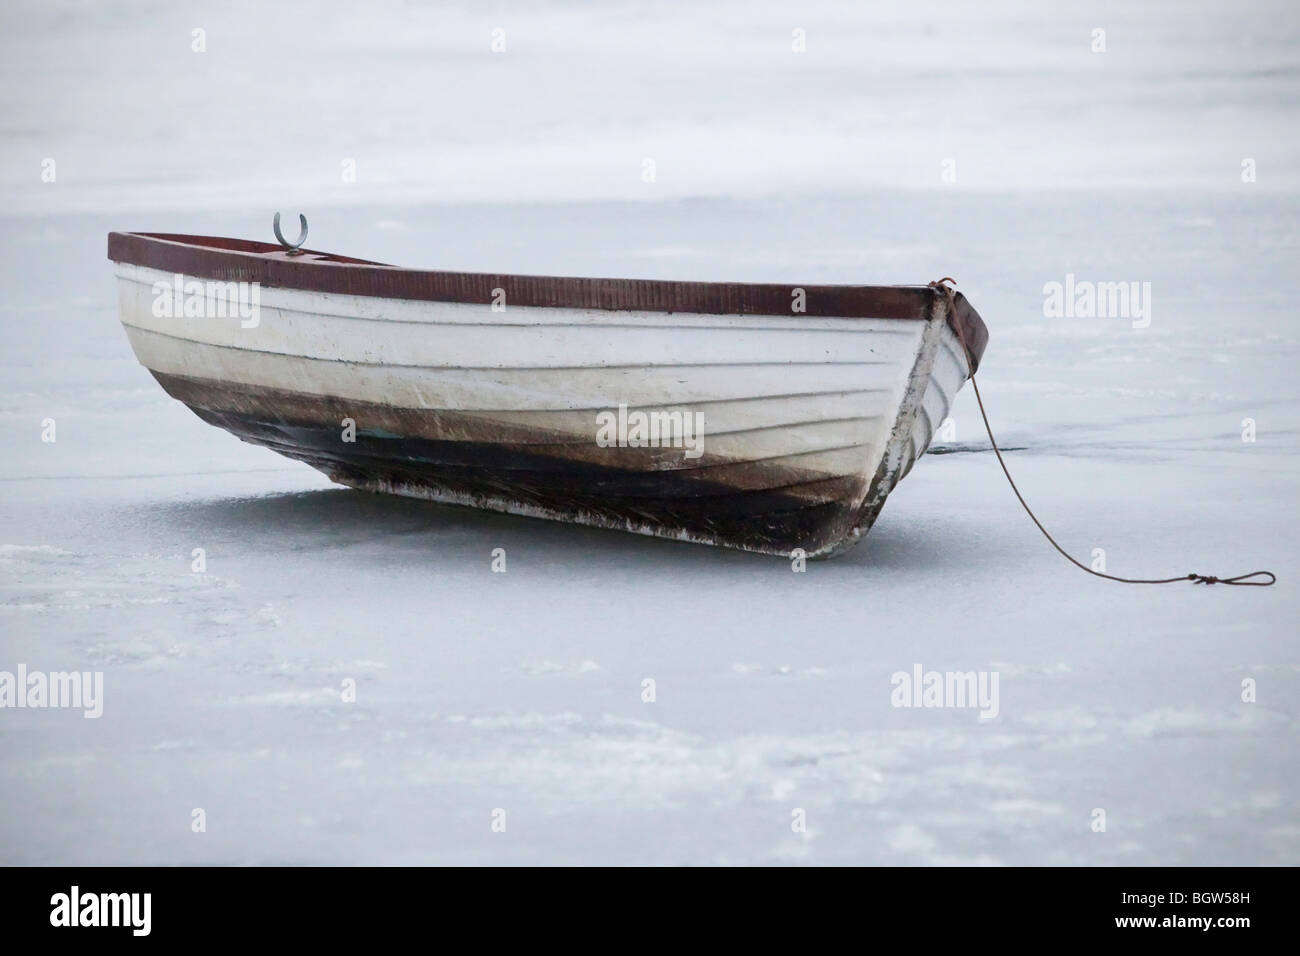 Small boat on an ice covered pond in winter Stock Photo